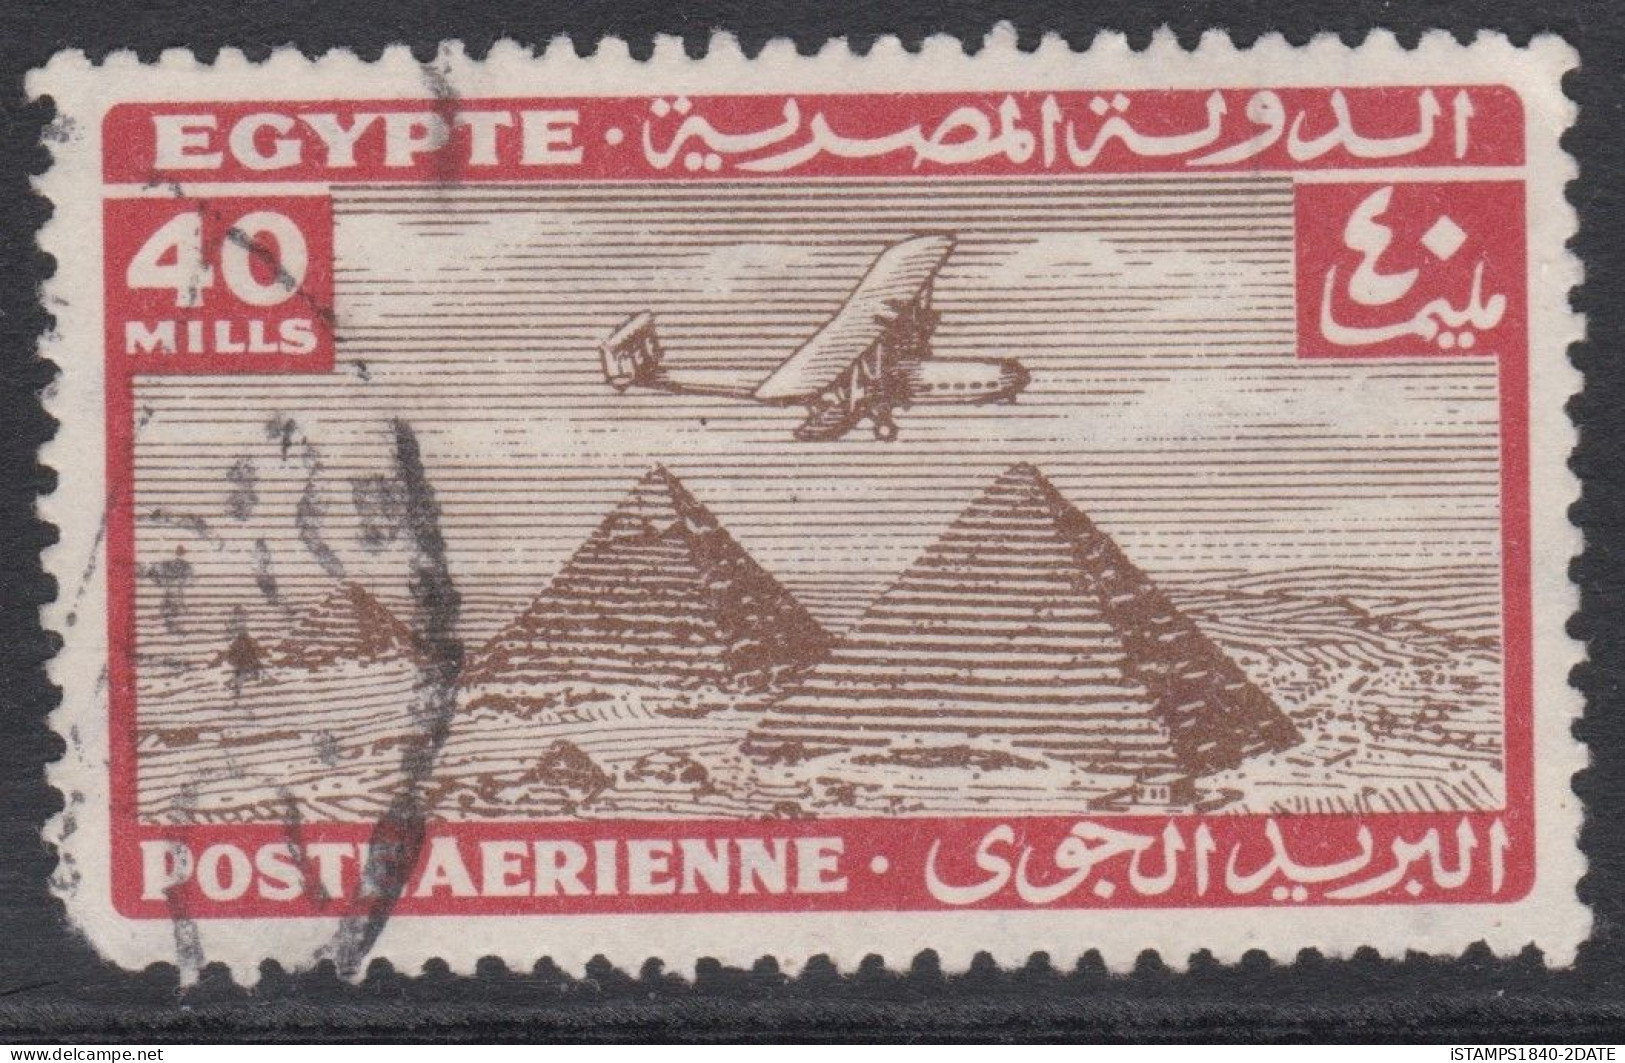 00680/ Egypt 1934/38 Air Mail 40m Used Plane Over Pyramid - Luftpost